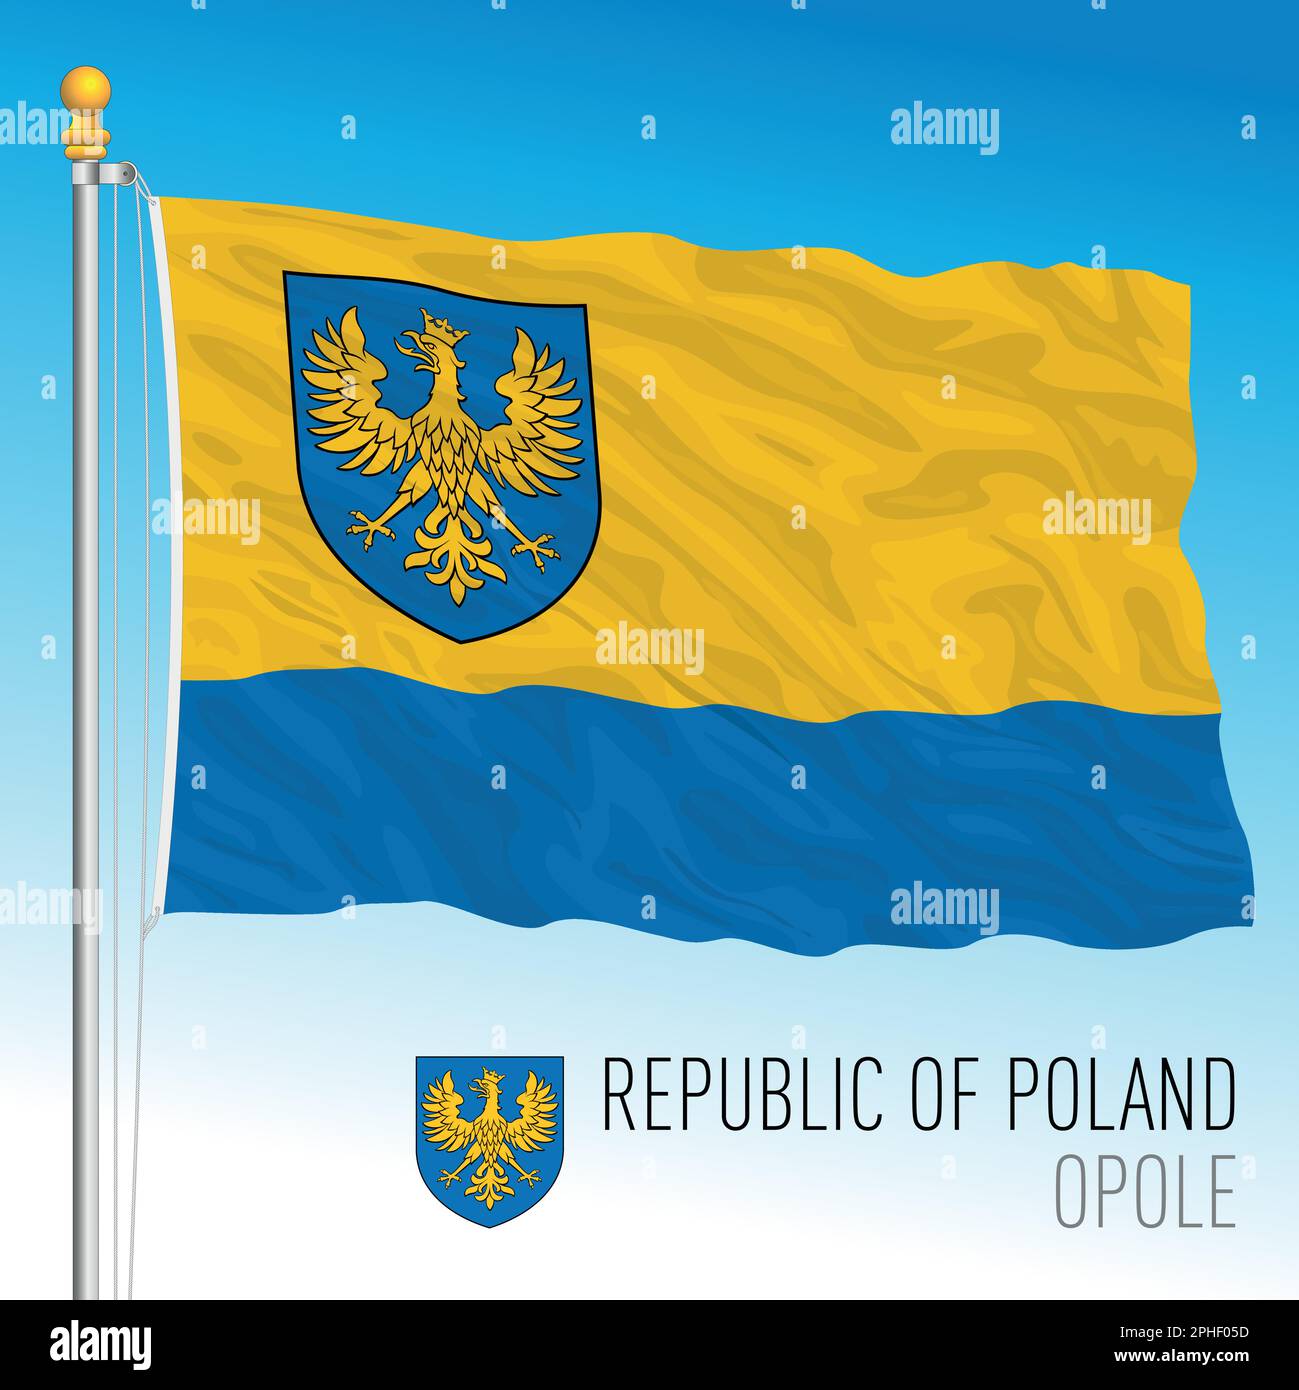 Opole regional flag and coat of arms, Republic of Poland, european country, vector illustration Stock Vector